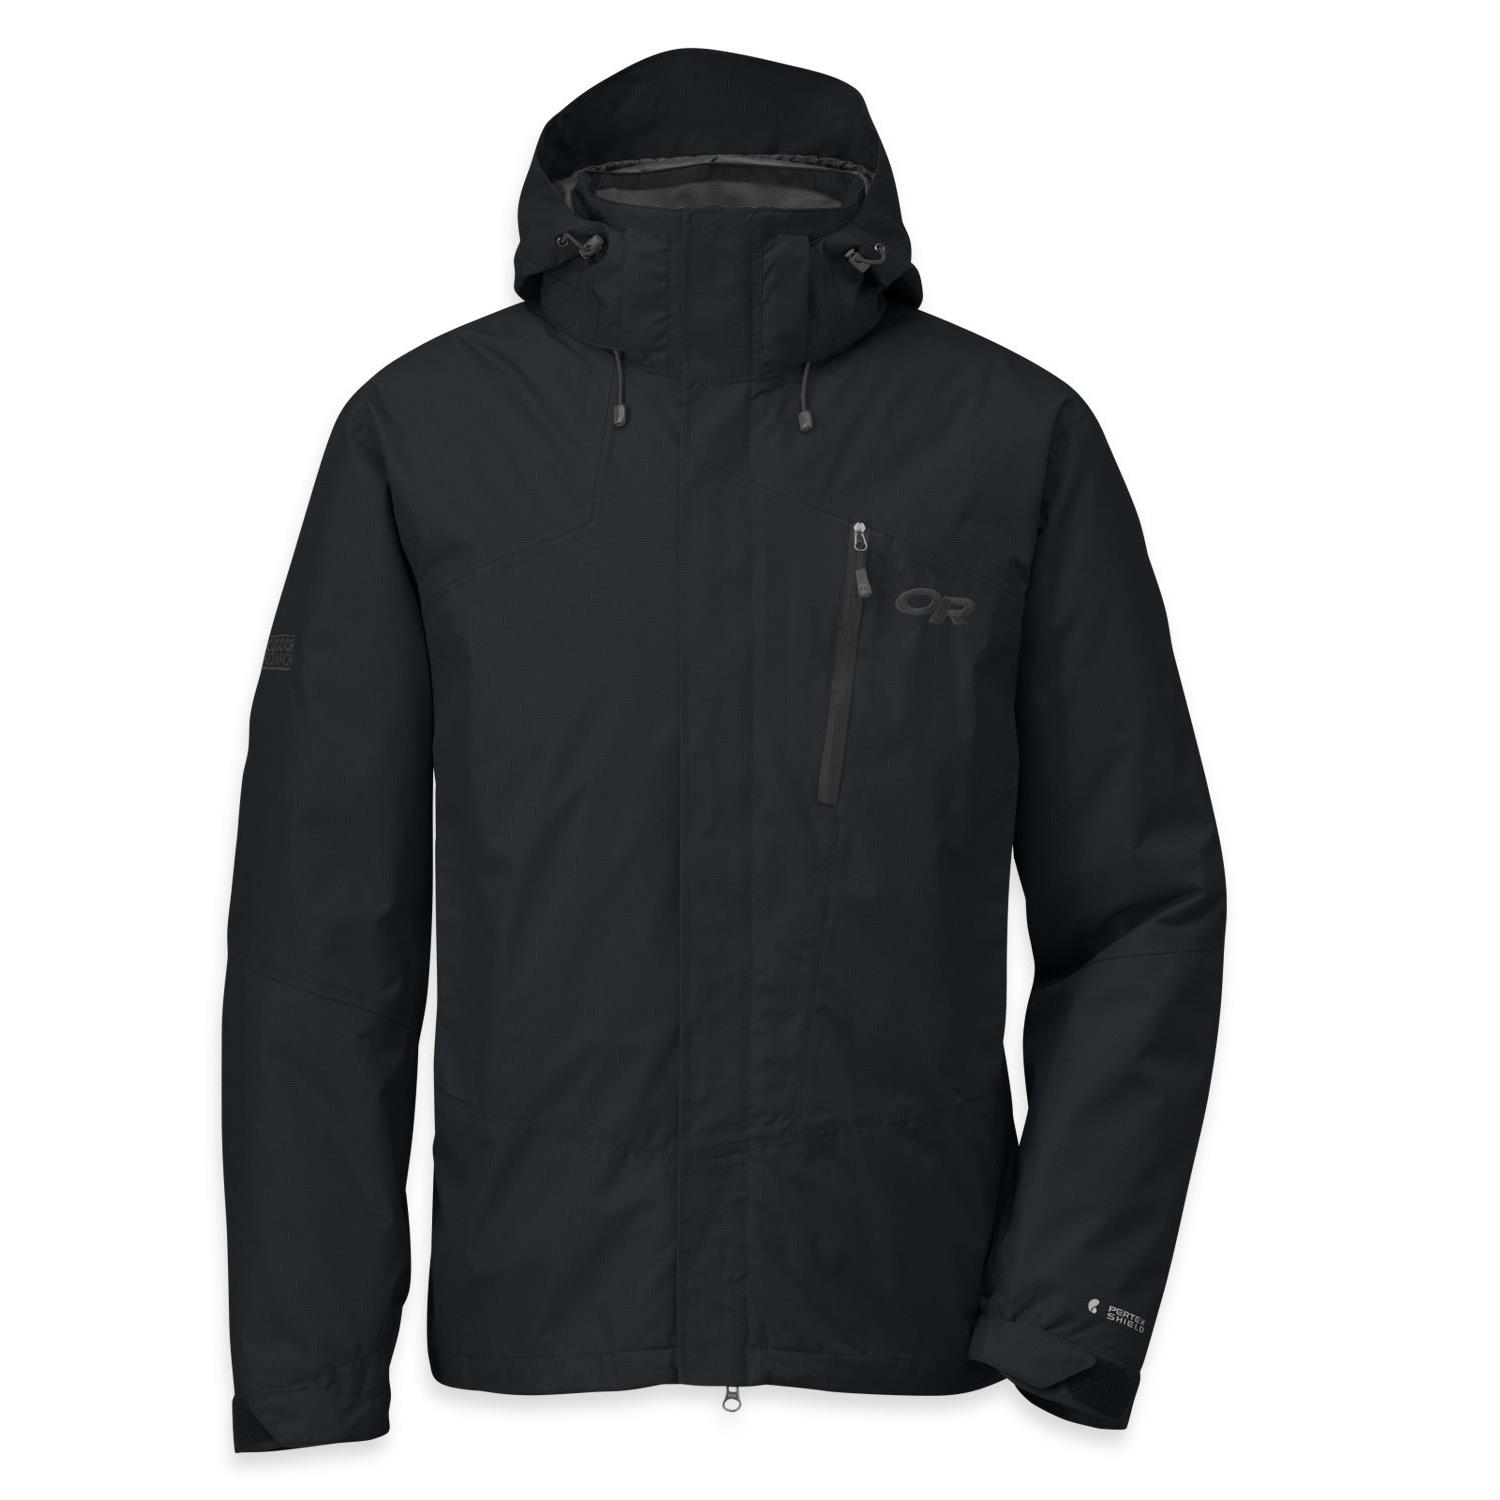 Outdoor Research Igneo Jacket | evo outlet